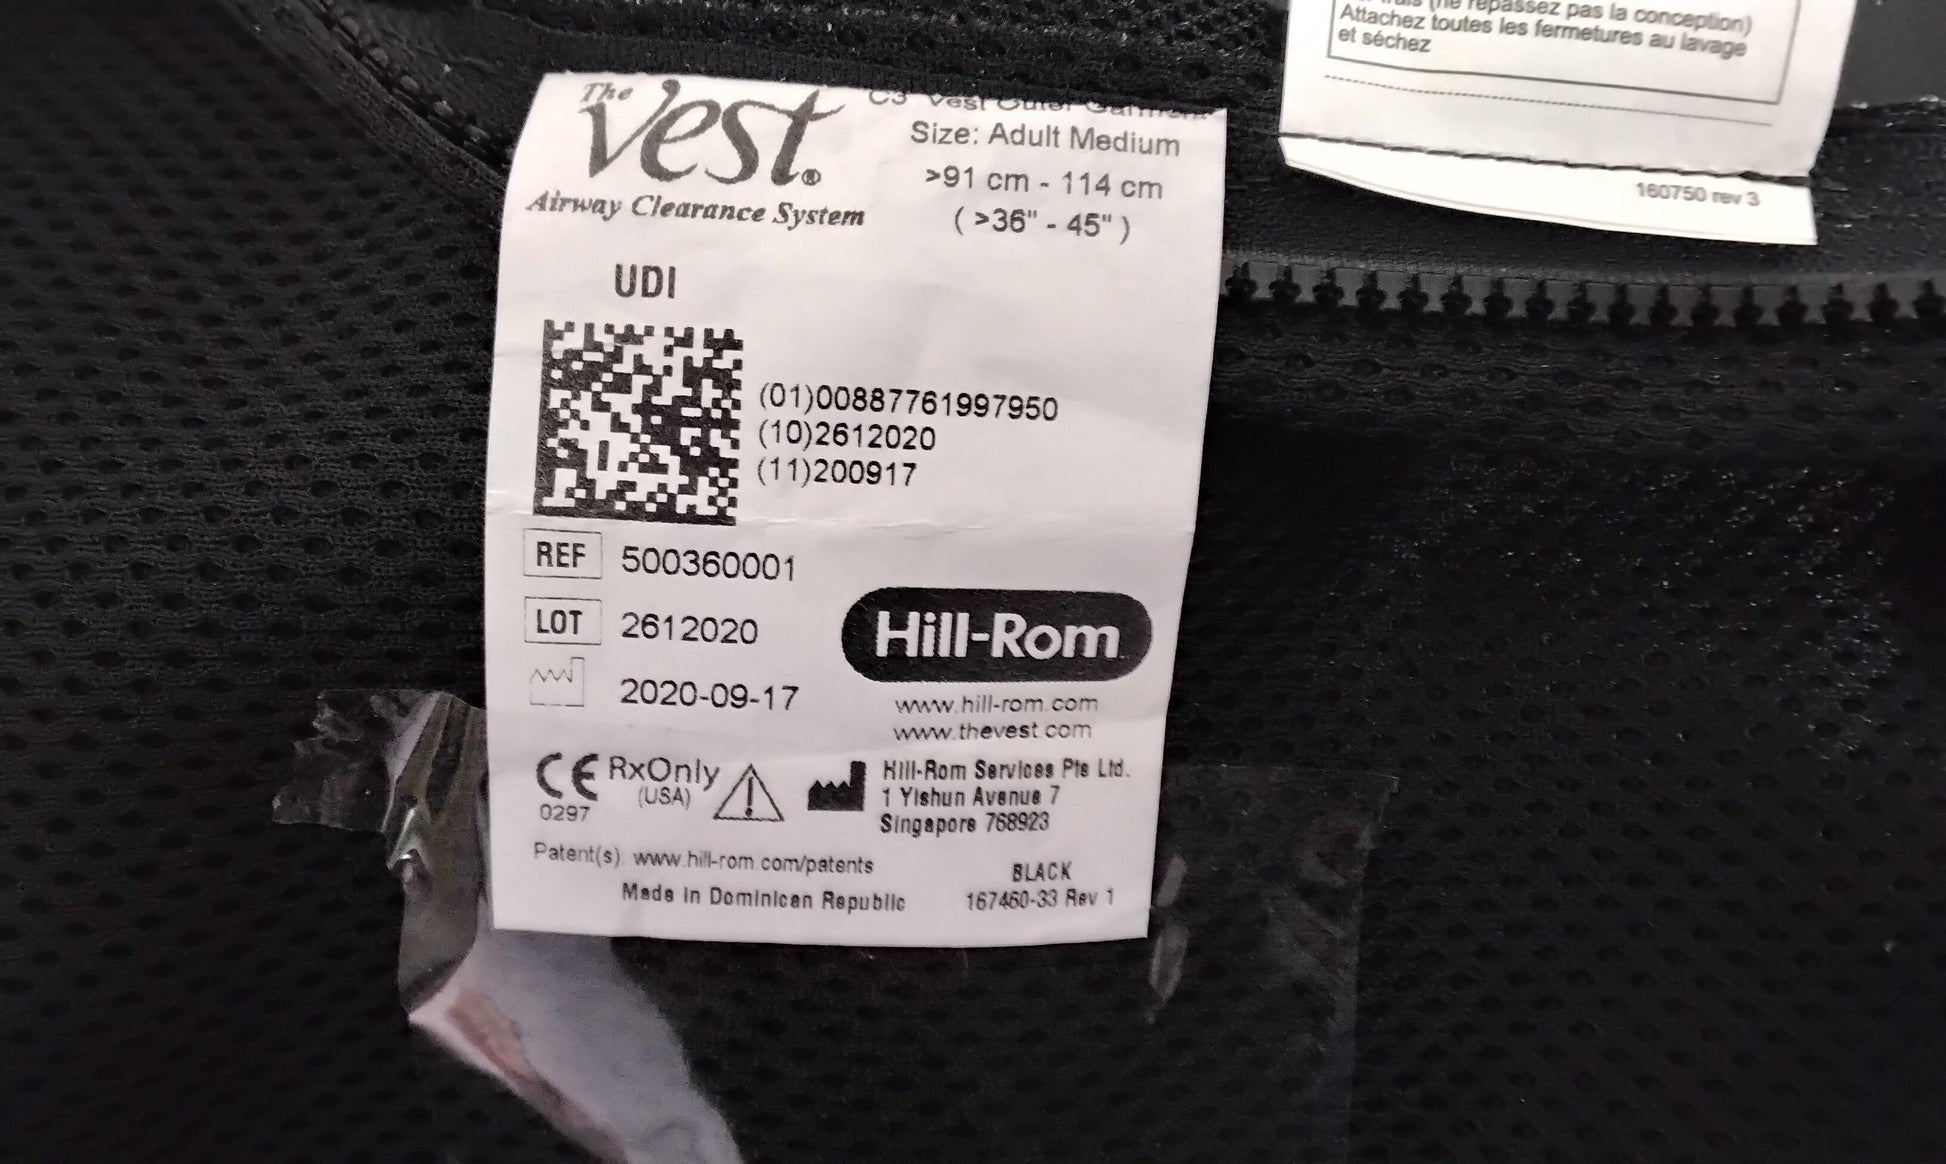 USED Adult Medium Hill-Rom The Vest Airway Clearance C3 Outer Vest Garment 167460-33 with Free Shipping & Warranty - MBR Medicals